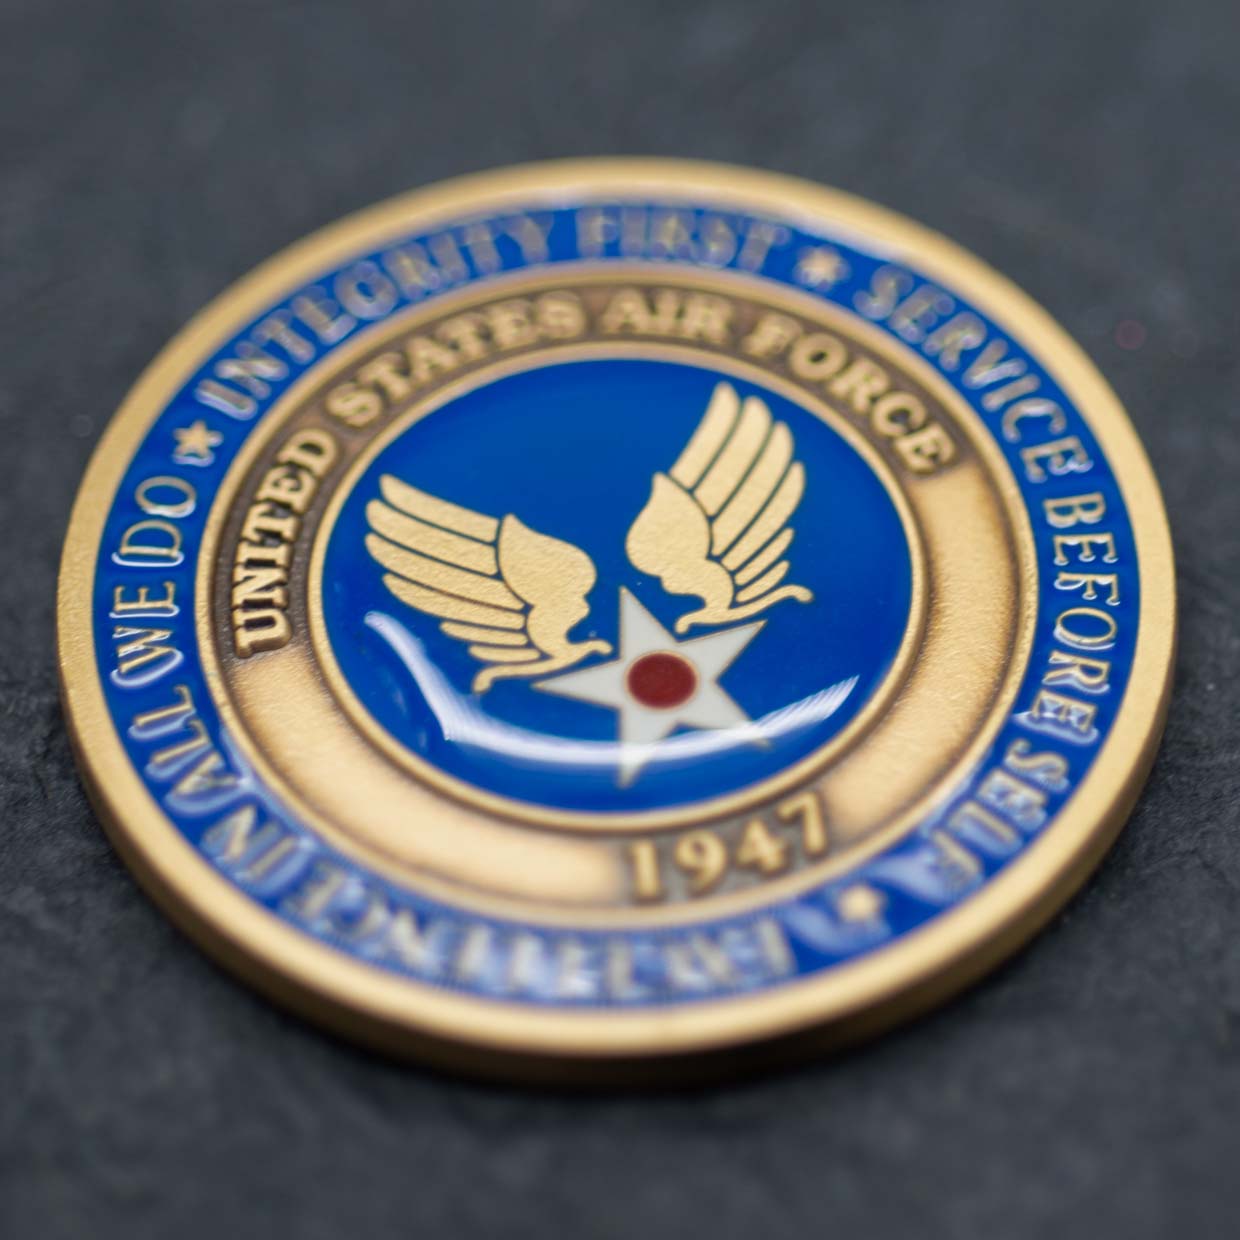 United States Air Force Coin Detail